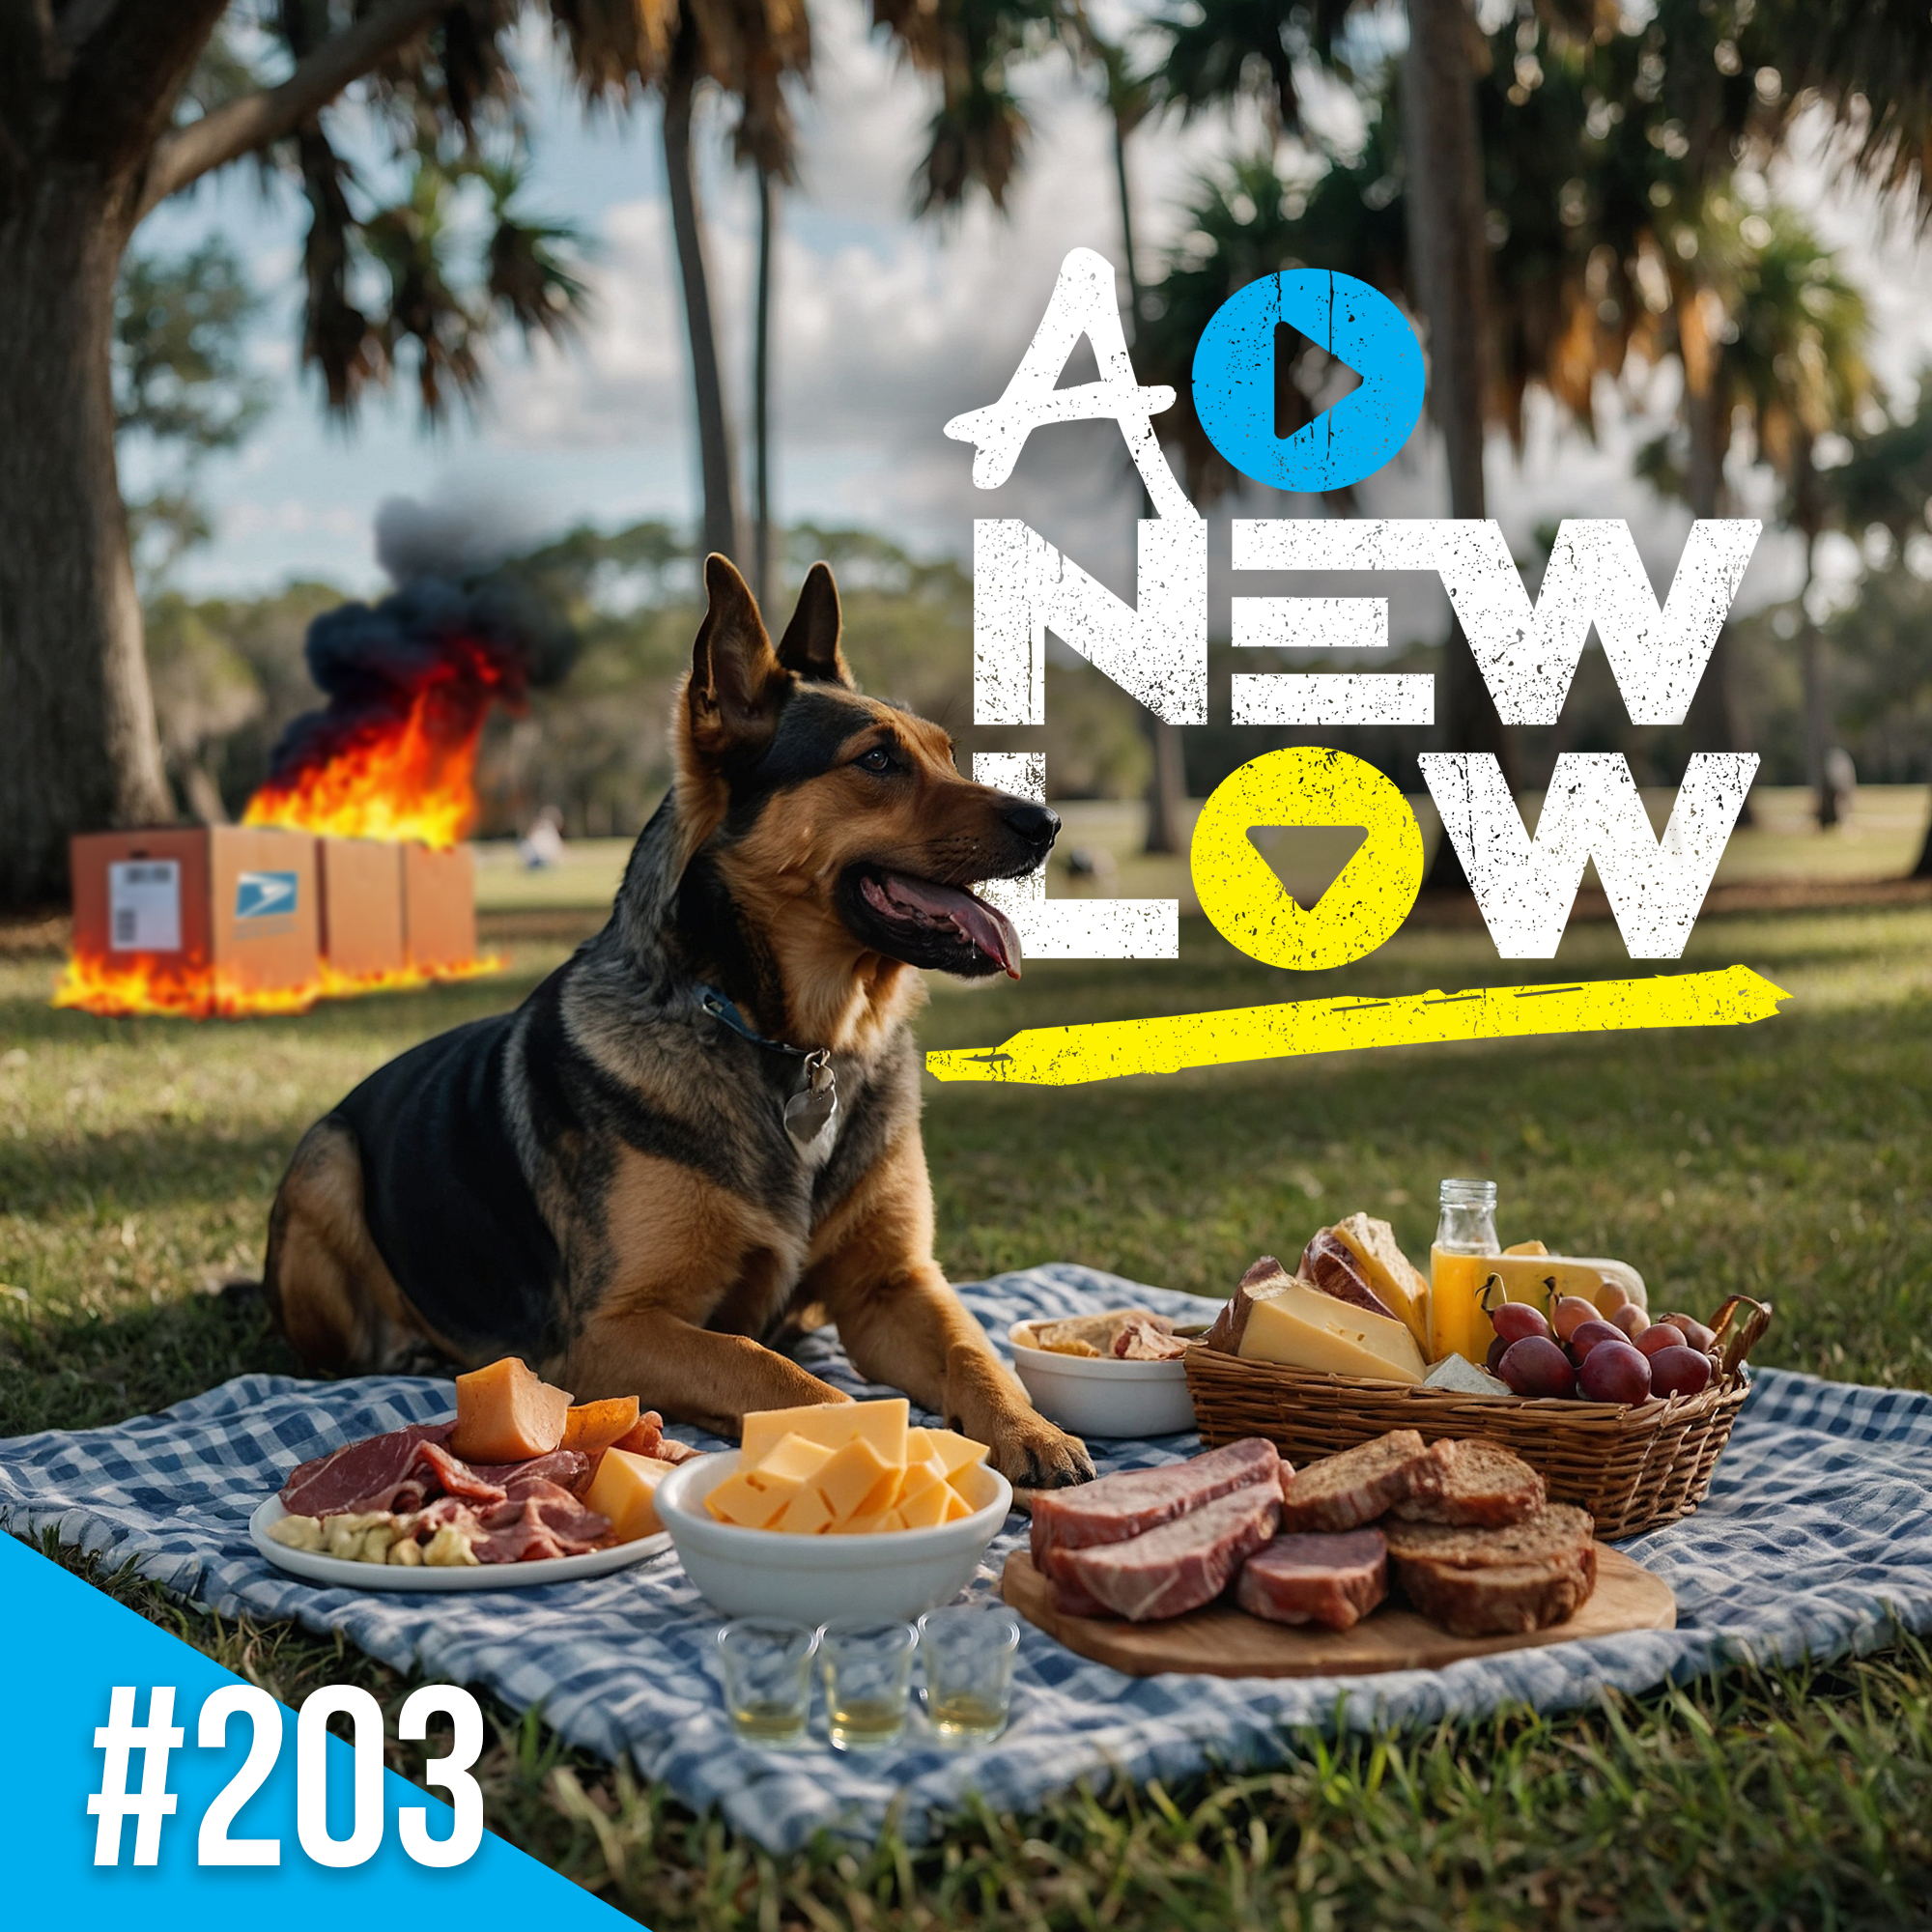 Ep. 203: Potty Training Your Date at a Picnic